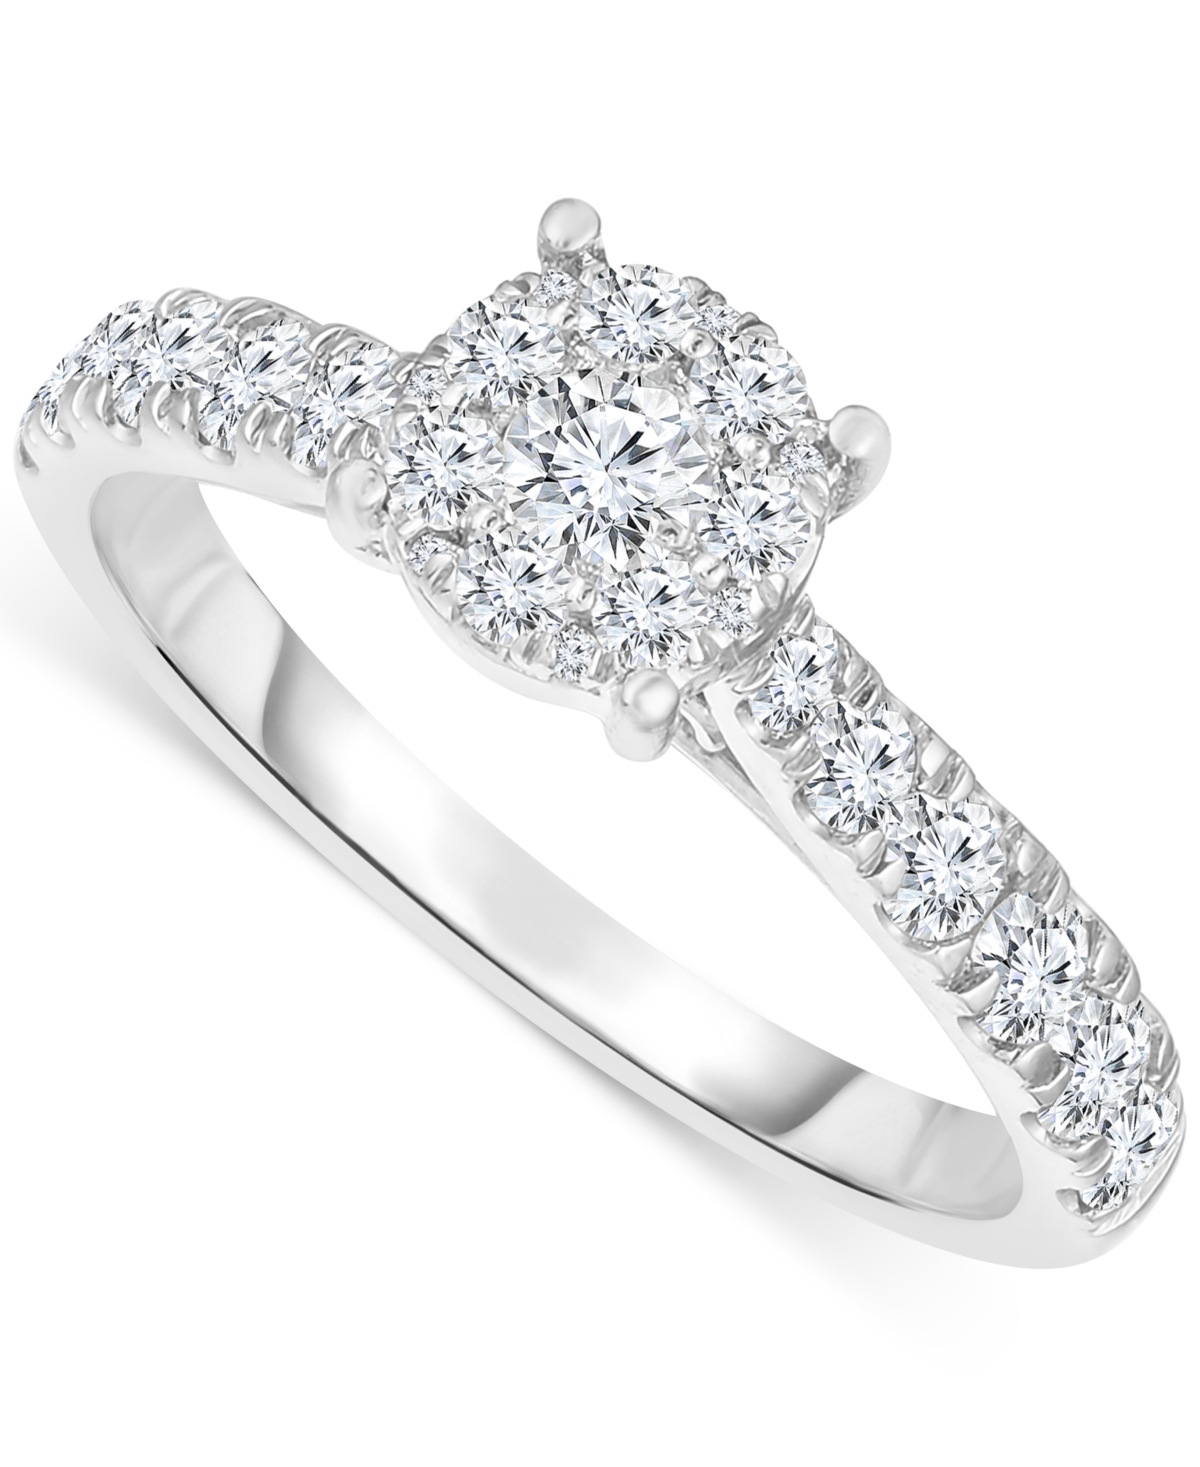 Diamond Halo Engagement Ring (1 ct. t.w.) in 14k White Gold - White Gold